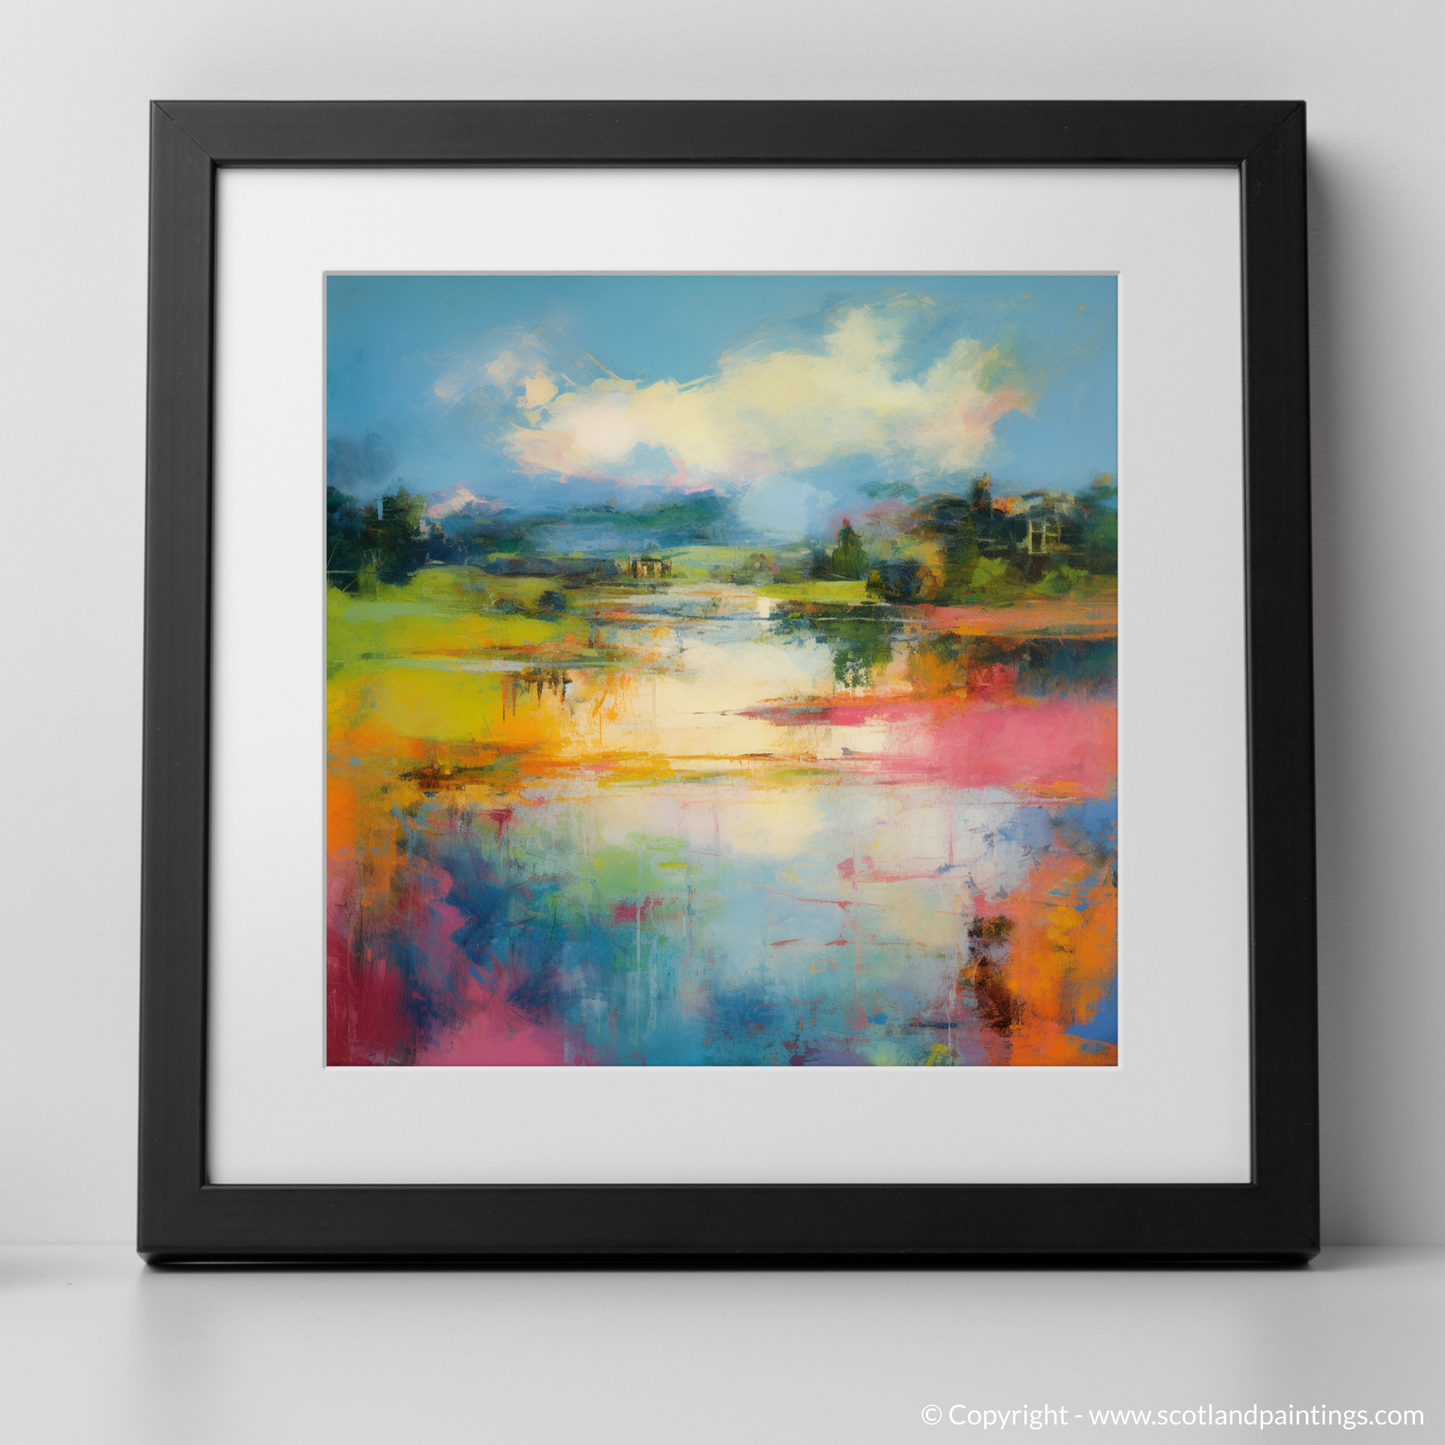 Art Print of River Ness, Inverness in summer with a black frame